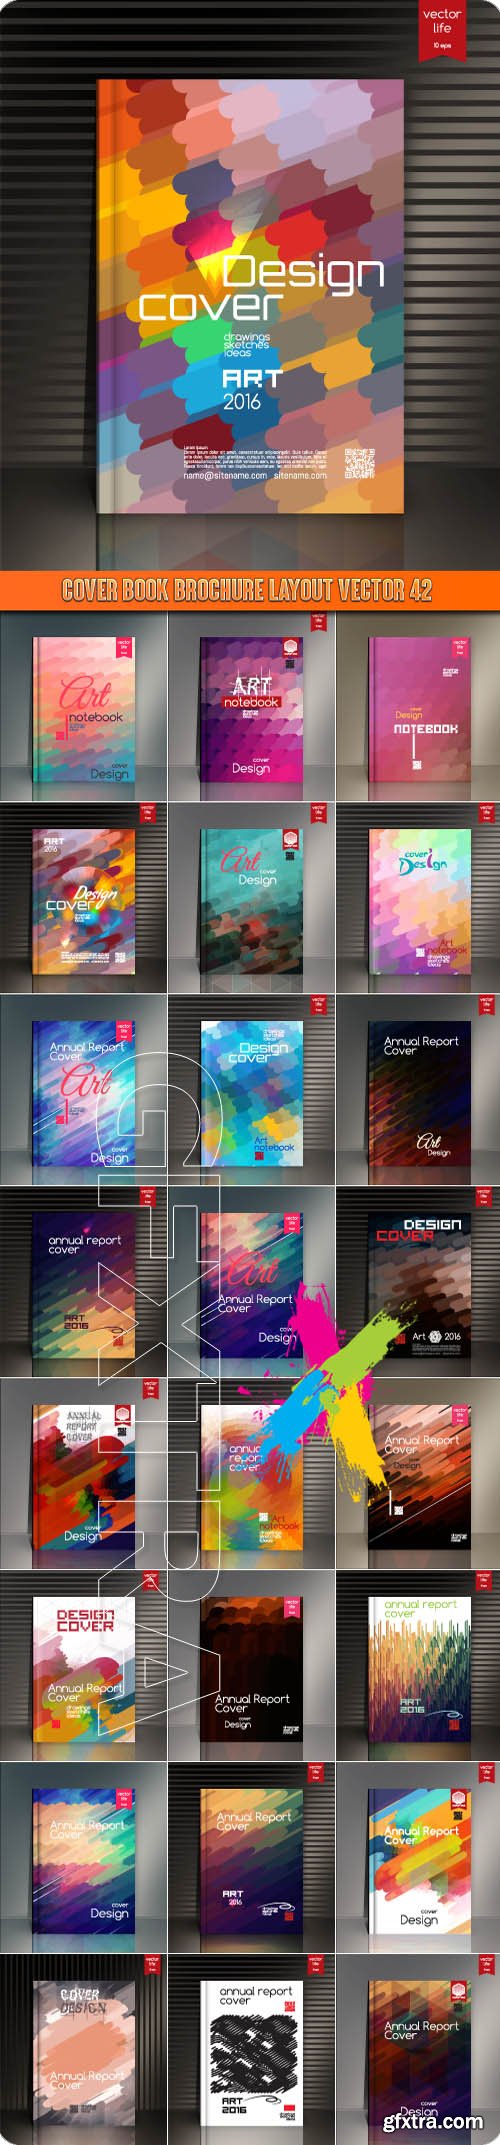 Cover book brochure layout vector 42